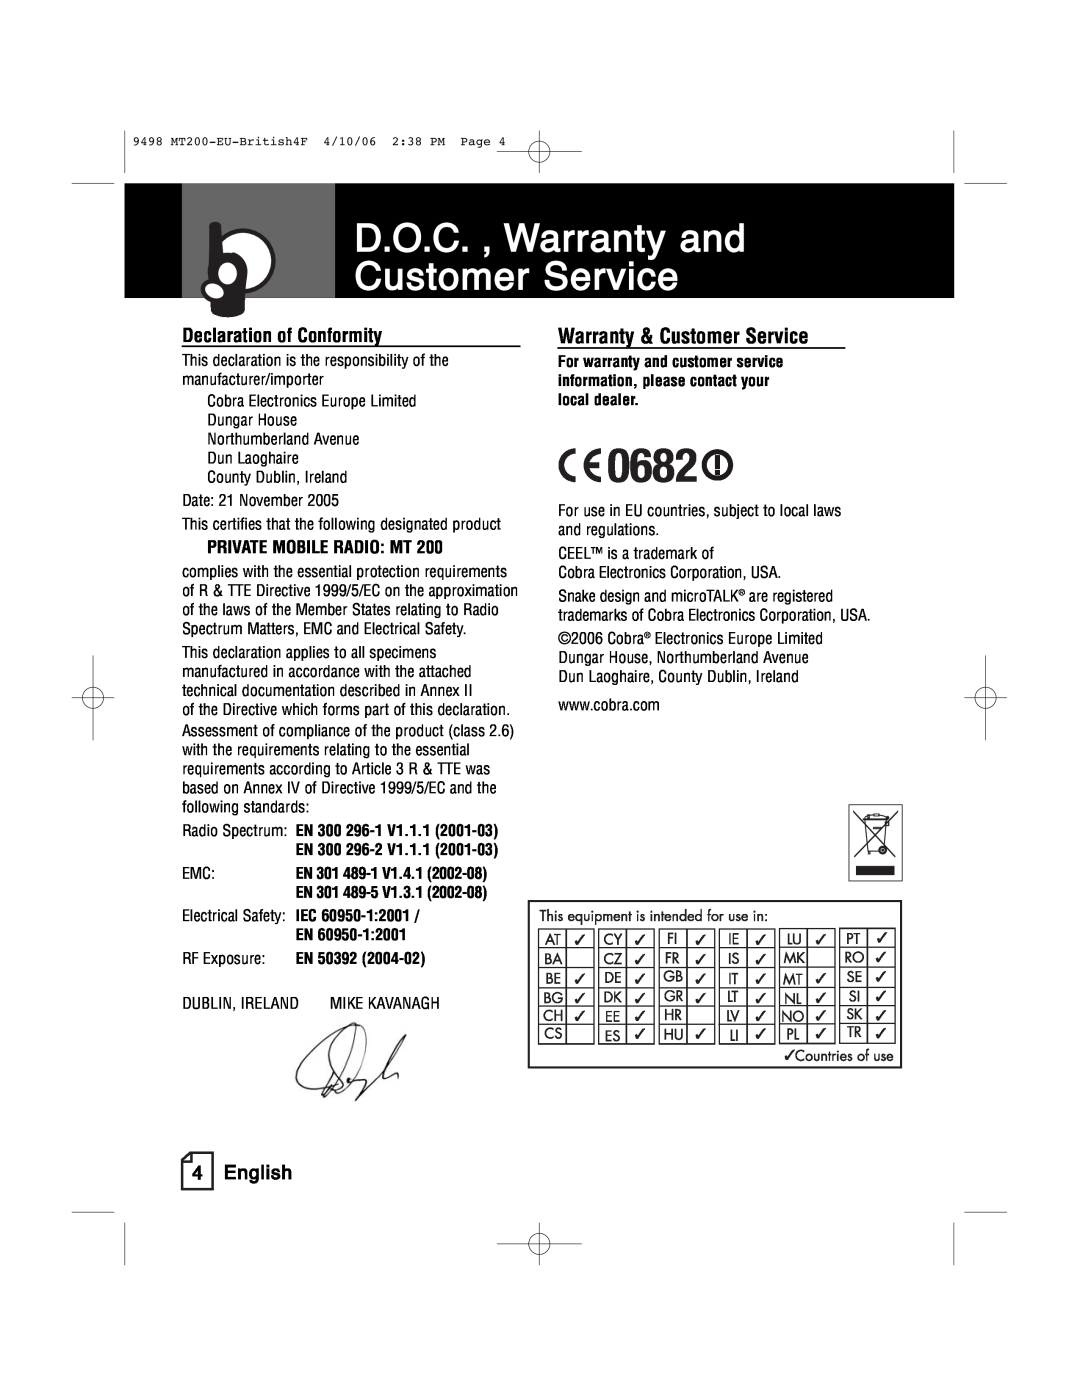 Cobra Electronics MT 200 D.O.C. , Warranty and Customer Service, Declaration of Conformity, English, Electrical Safety IEC 